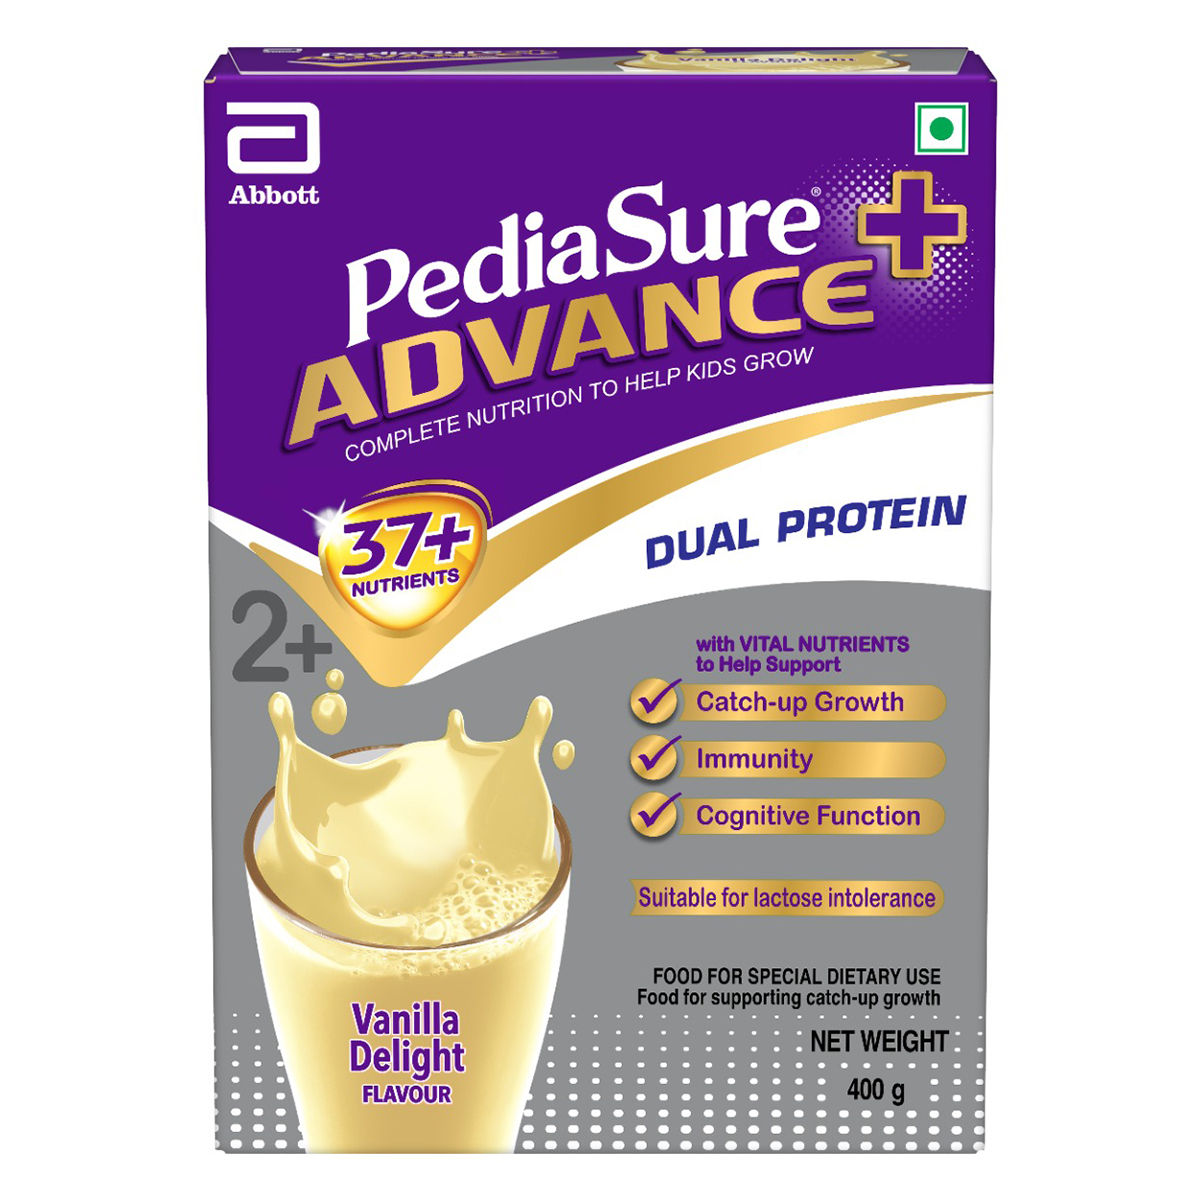 Pediasure Advance+ Vanilla Delight Flavour Nutrition Drink Powder, 400 gm  Refill Pack Price, Uses, Side Effects, Composition - Apollo Pharmacy